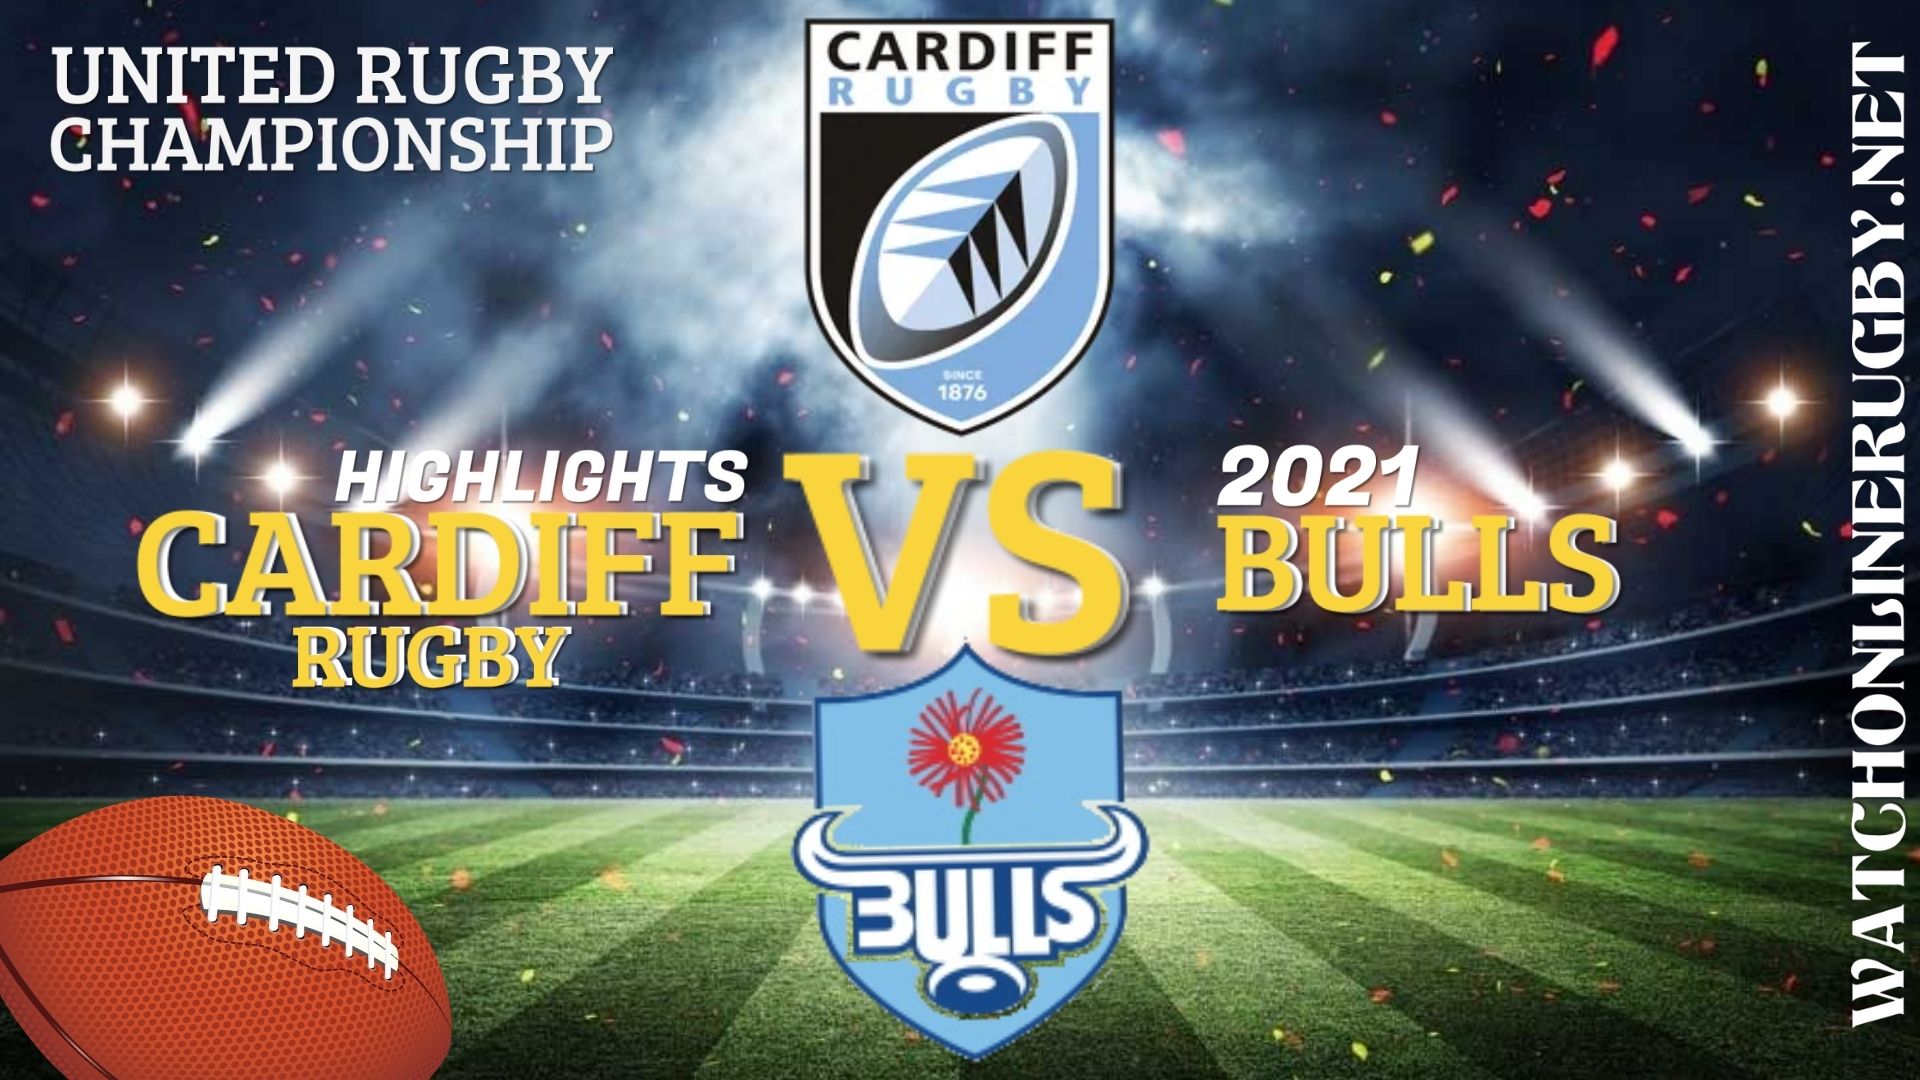 Cardiff Rugby Vs Bulls United Rugby Championship 2021 RD 3